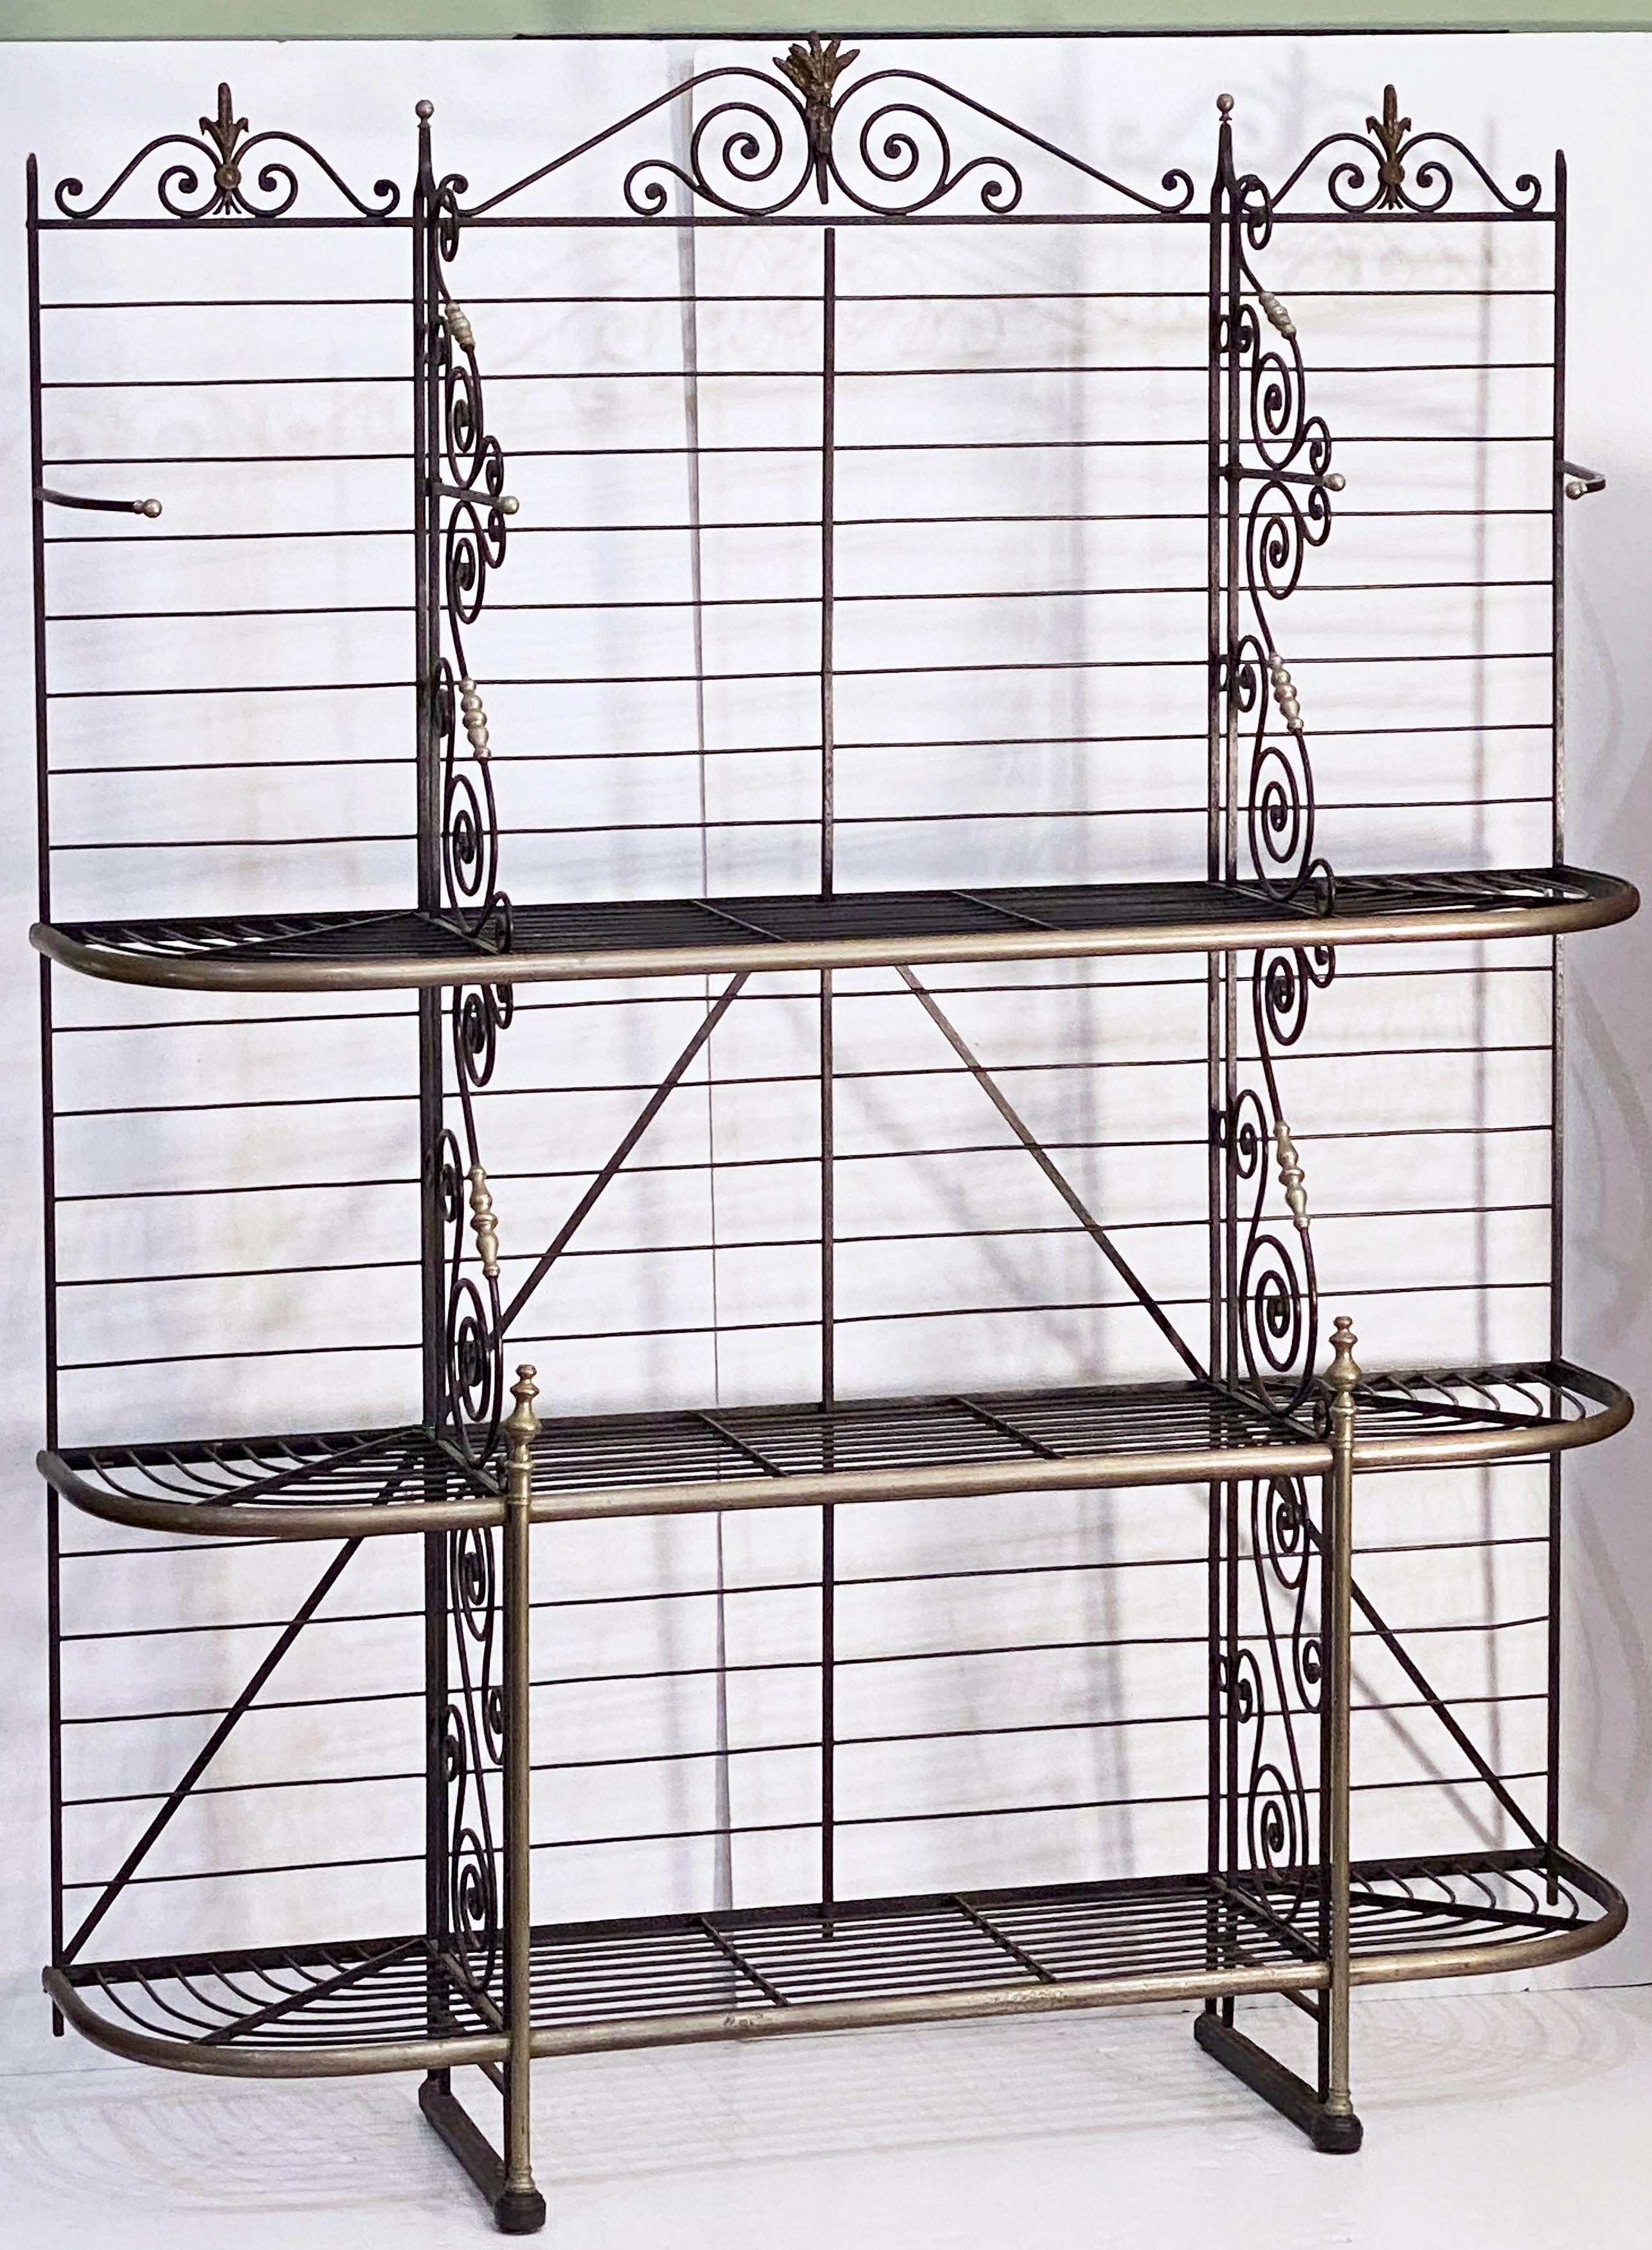 A large French baker's rack boulangerie or patisserie display stand of wrought iron with decorative brass and nickel trim - featuring a beautiful frame with scrolled dividing panels, topped with finials and detailed gilded sheaves of wheat, and